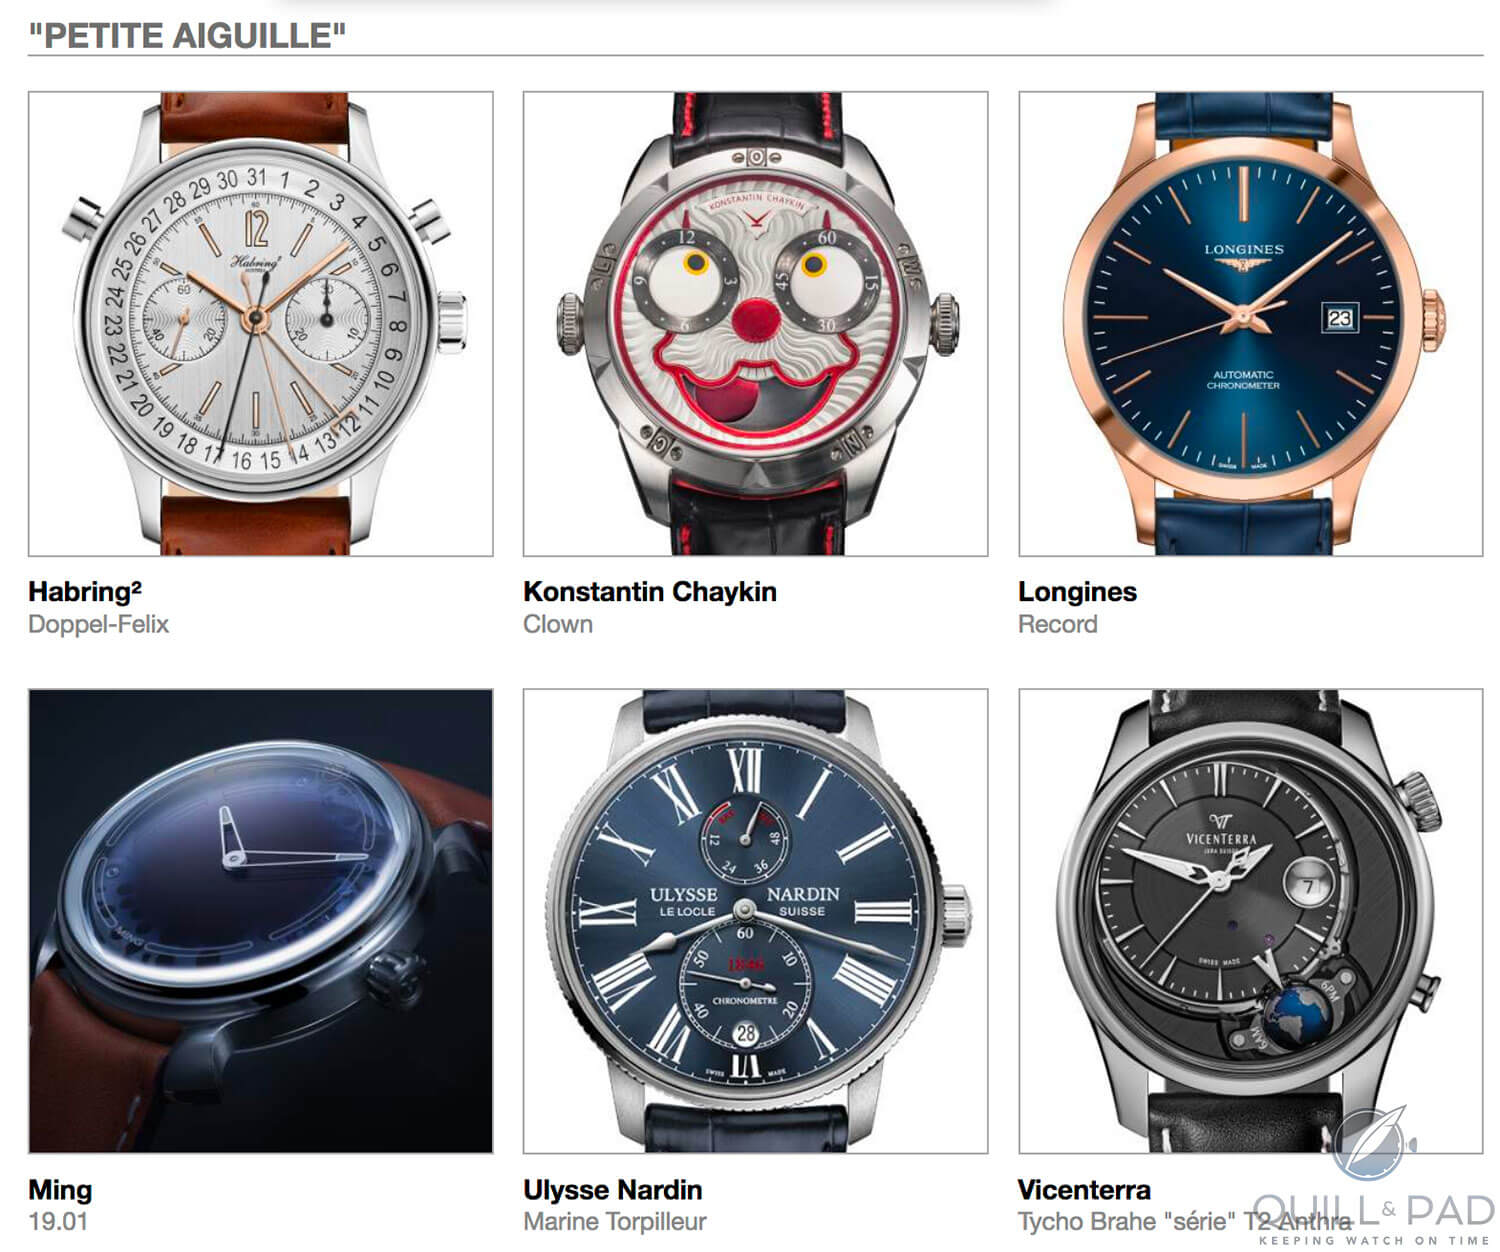 Petite Aiguille category pre-selected watches for the 2018 Grand Prix d’Horlogerie de Genève, clockwise from top left: Habring2 Doppel-Felix, Konstantin Chaykin Clown, Longines Record, Ming 19.01, Ulysse Nardin Marine Torpilleur, and Vicenterra Tycho Brahe Série T2 Anthra